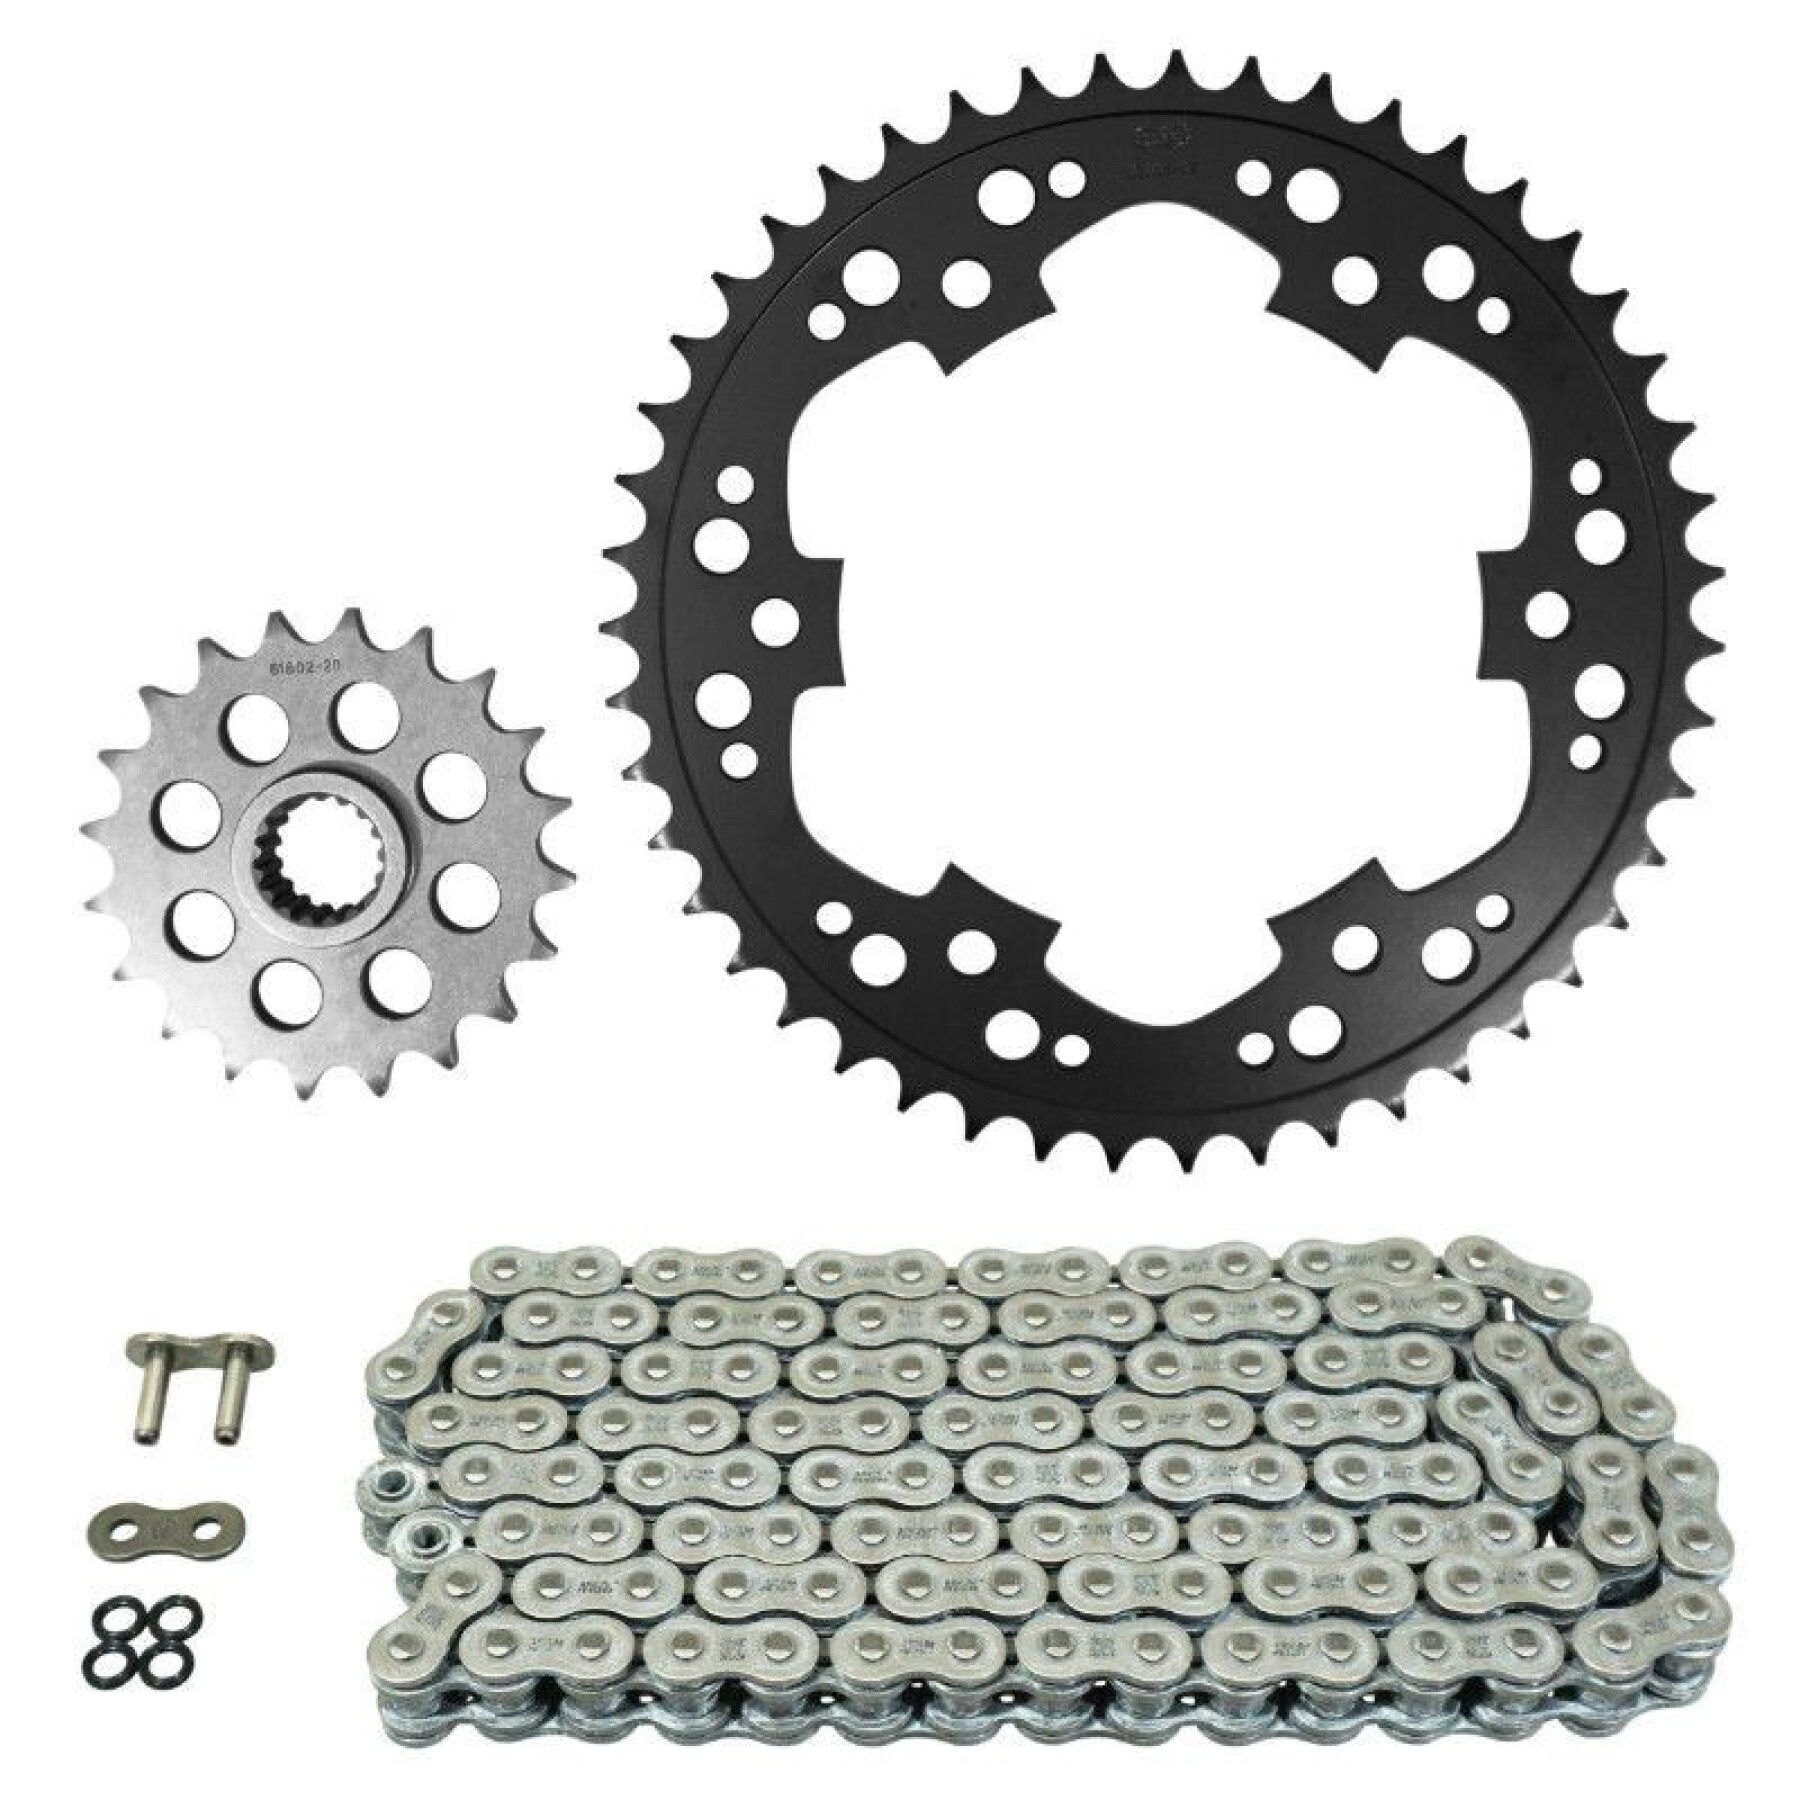 Motorcycle chain kit Afam Bmw 800 F R 2005